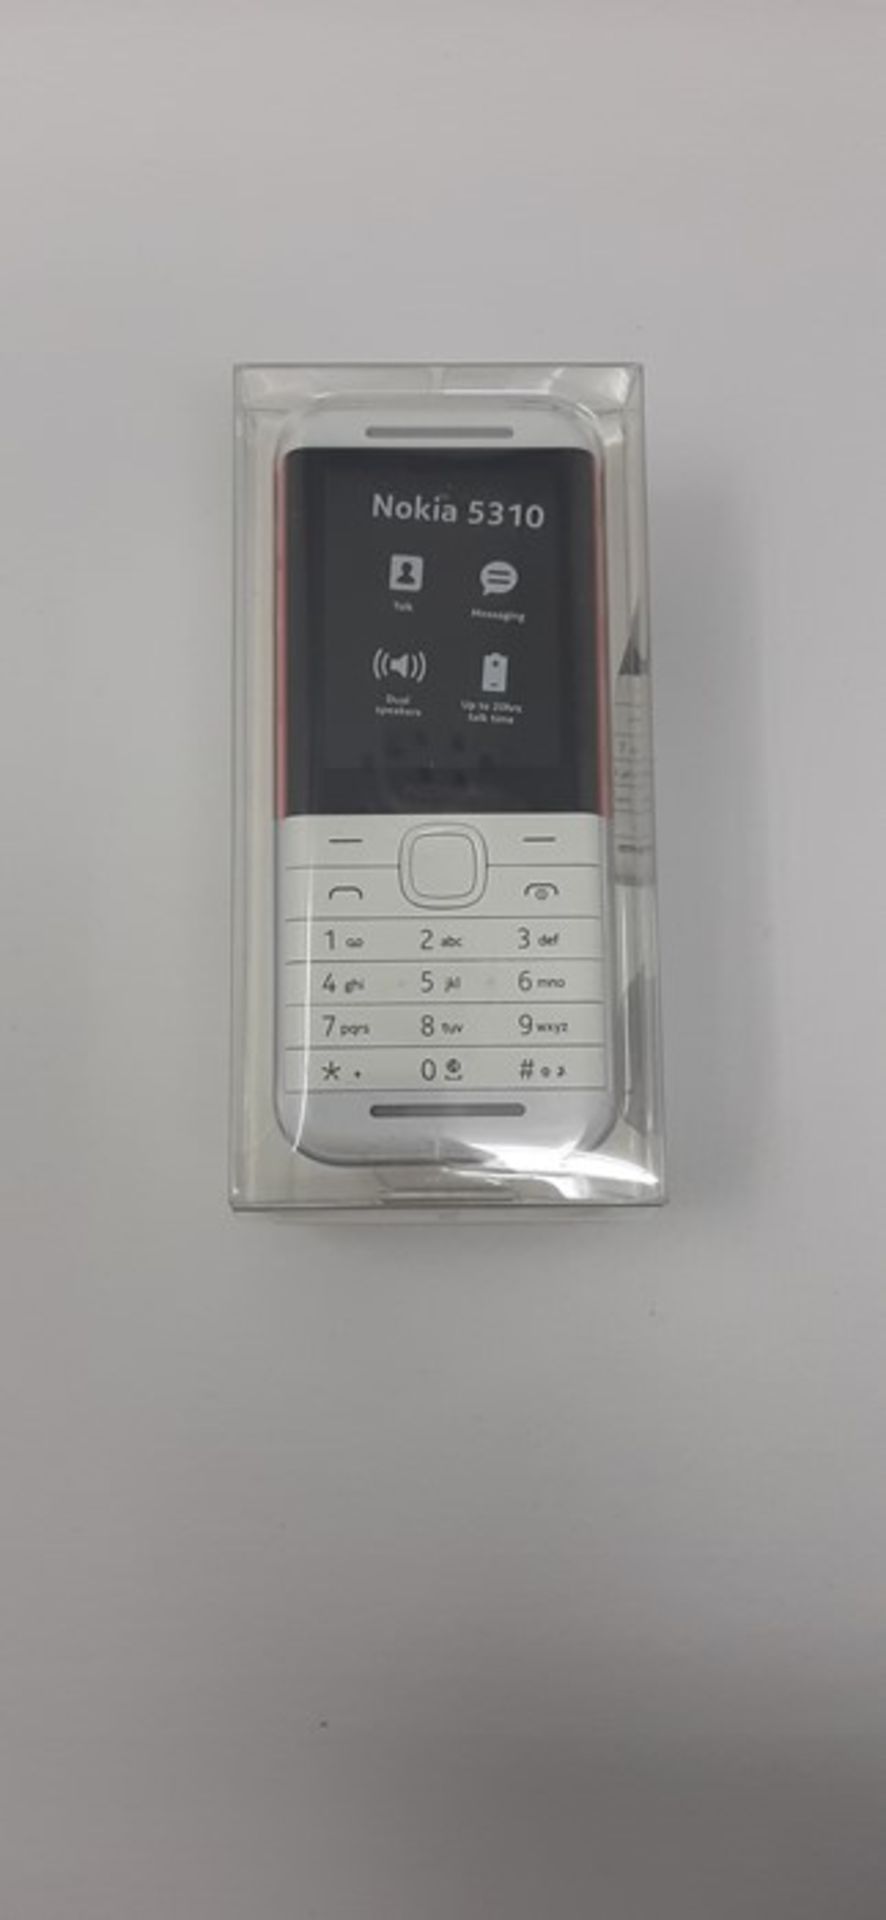 Nokia 5310 2.4 Inch 8 MB UK SIM-Free 2G Feature Phone (Dual Sim) - White/Red - Image 2 of 2